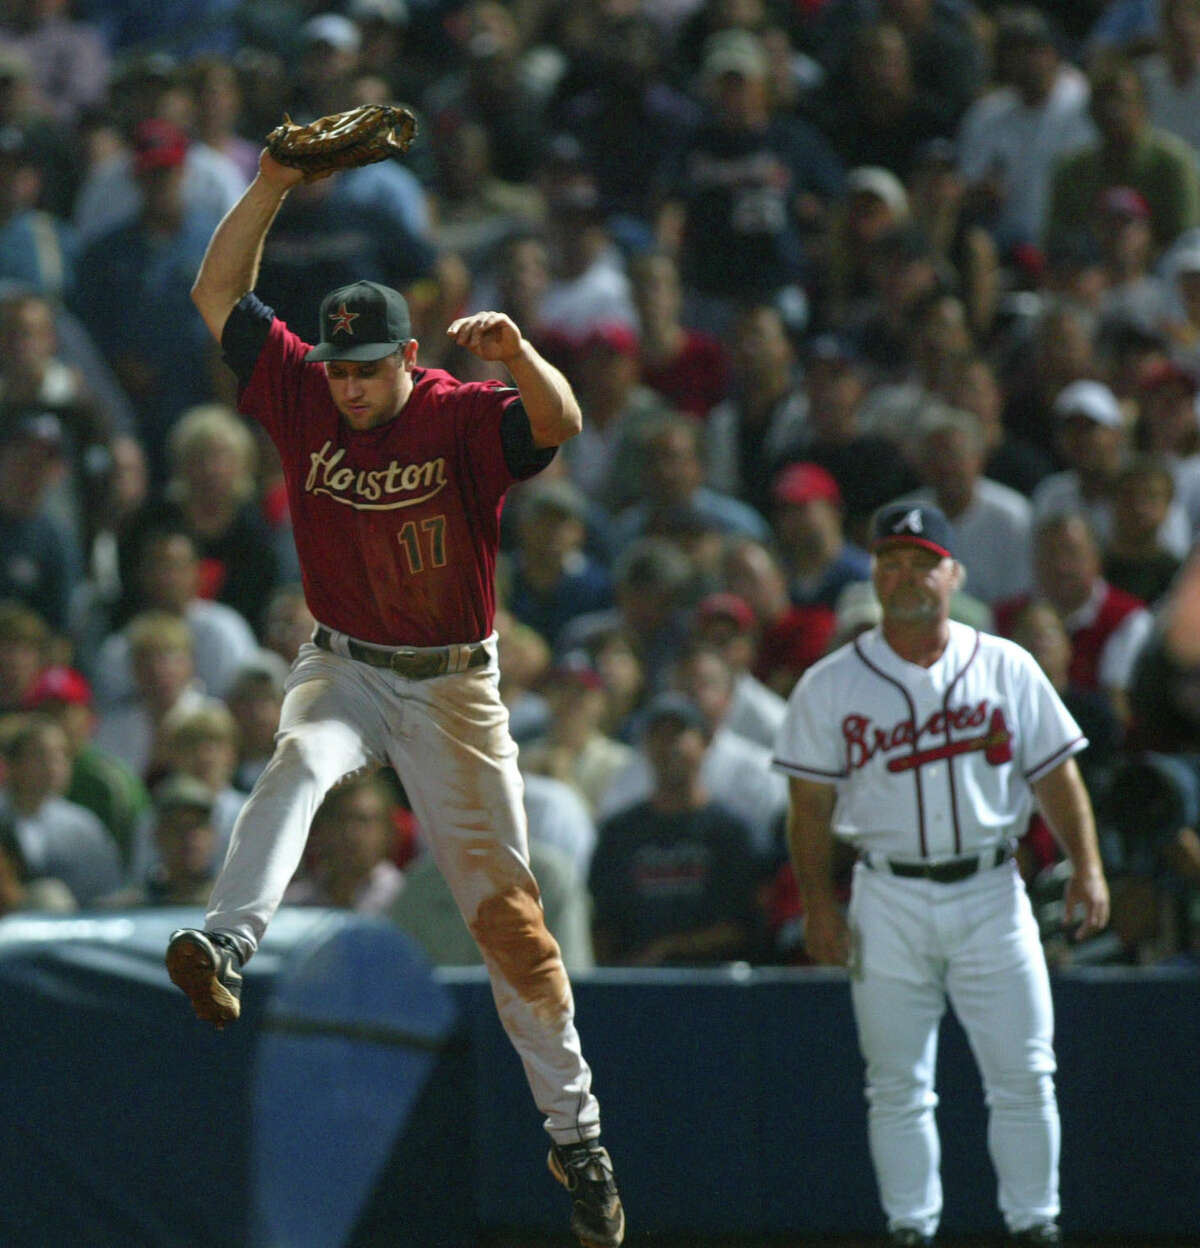 Lance Berkman leaps up to catch the ground ball hit by Andruw Jones during the 5th inning of Game Two of the National League Division Series, between the Houston Astros and the Atlanta Braves, at Turner Field in Atlanta, Georgia, Thursday, October 6, 2005(Karen Warren/Houston Chronicle)